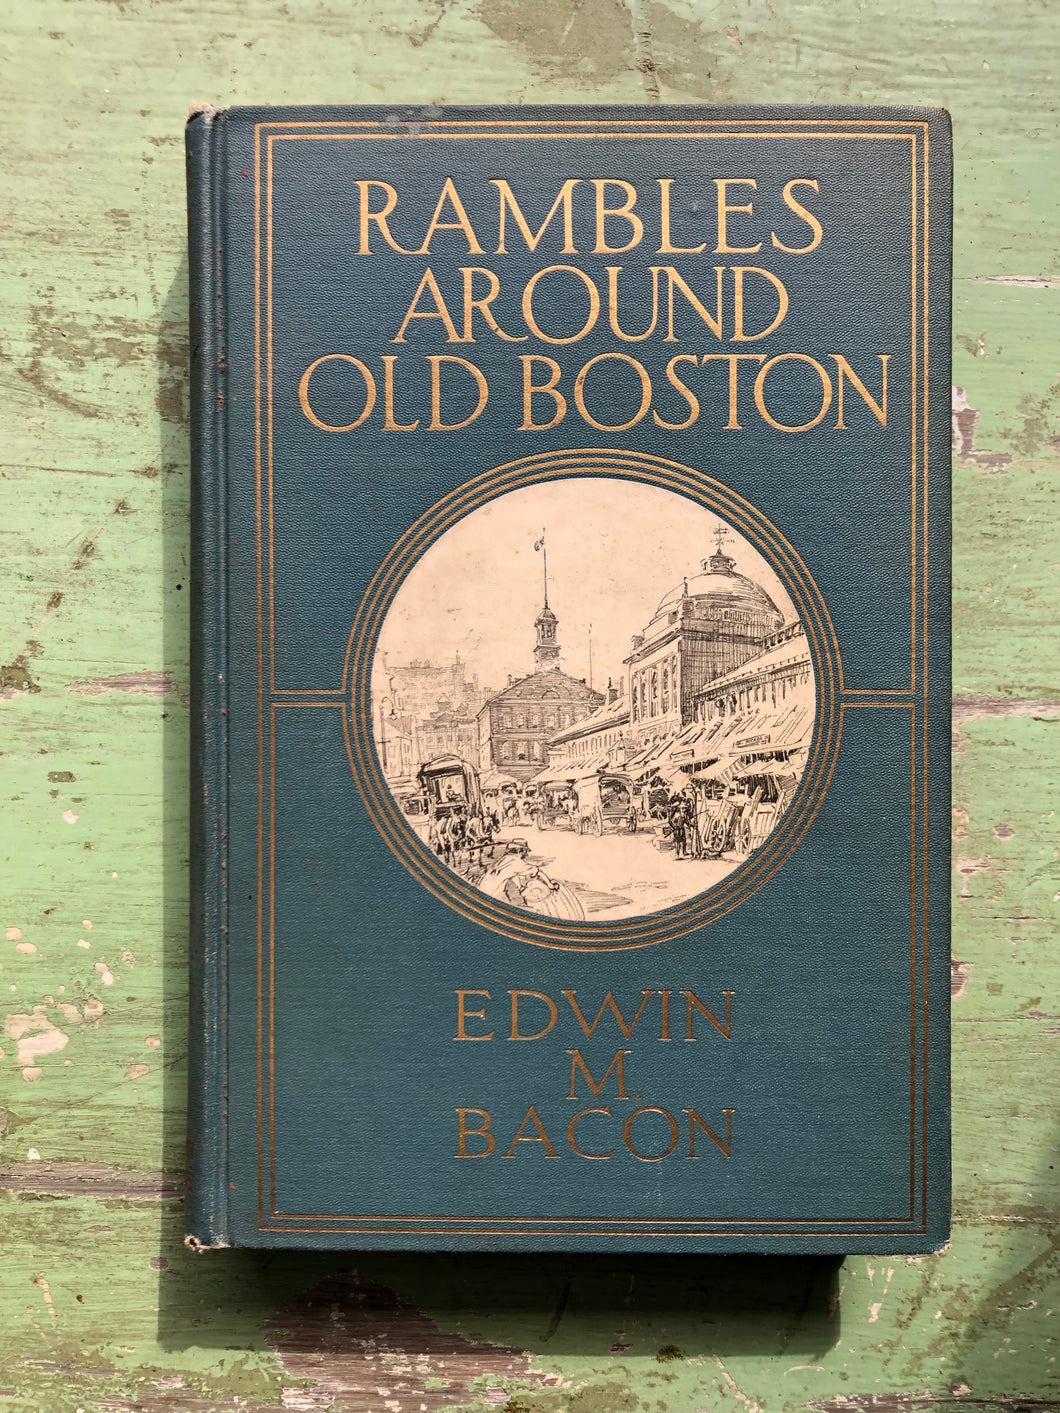 Rambles Around Old Boston. by Edwin M. Bacon with Drawings by Lester G. Hornby